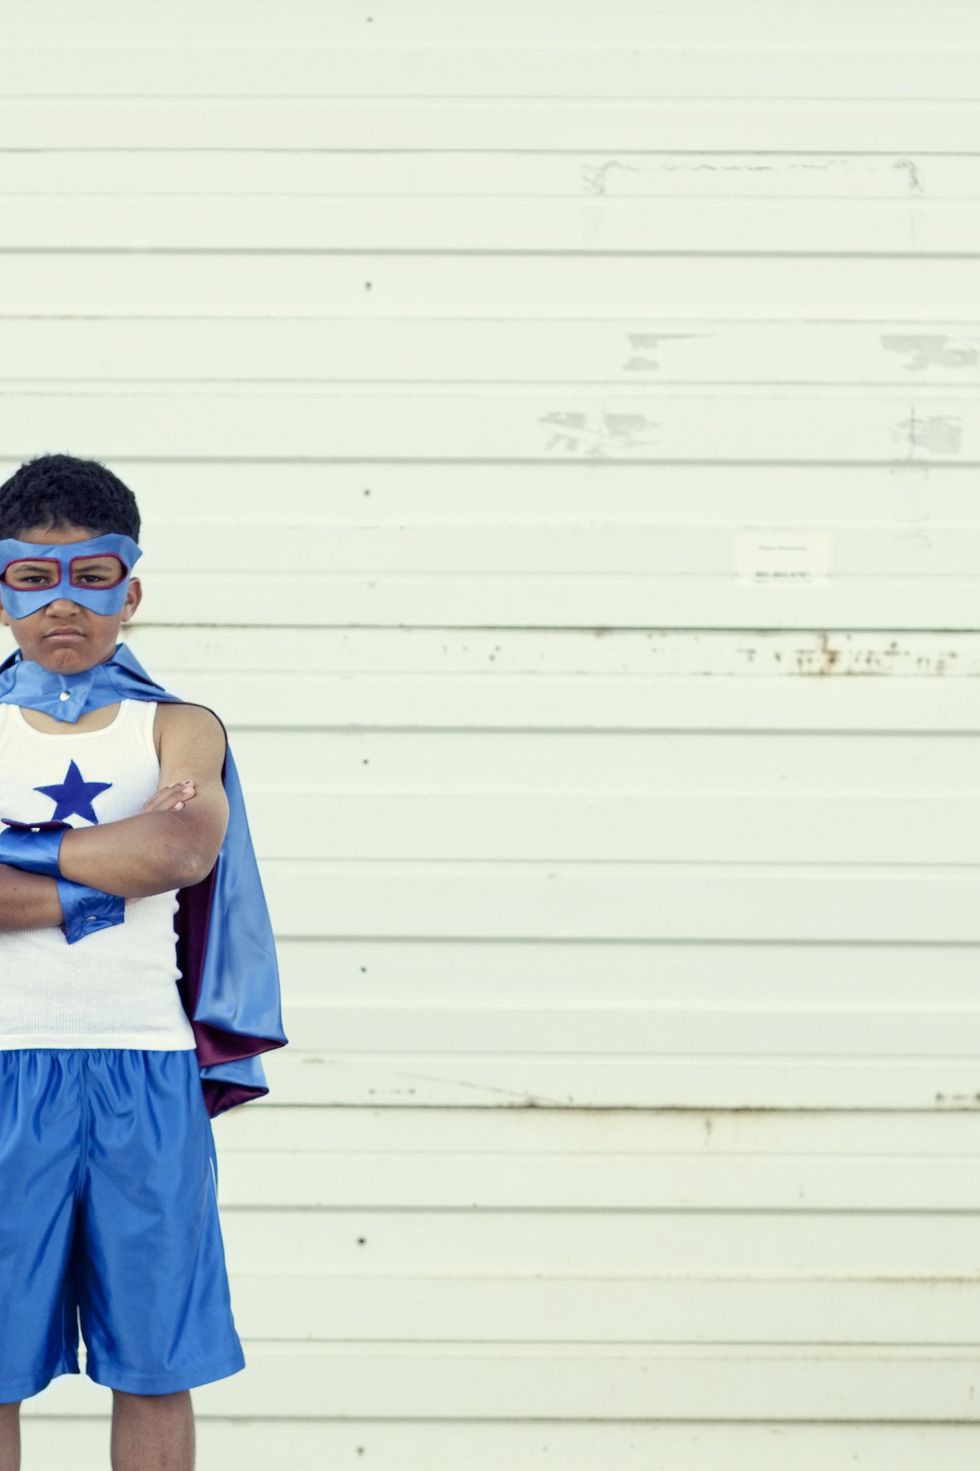 tween boy dressed as superhero halloween costume in blue mask, cape, and basketball shorts and tank with blue star on it